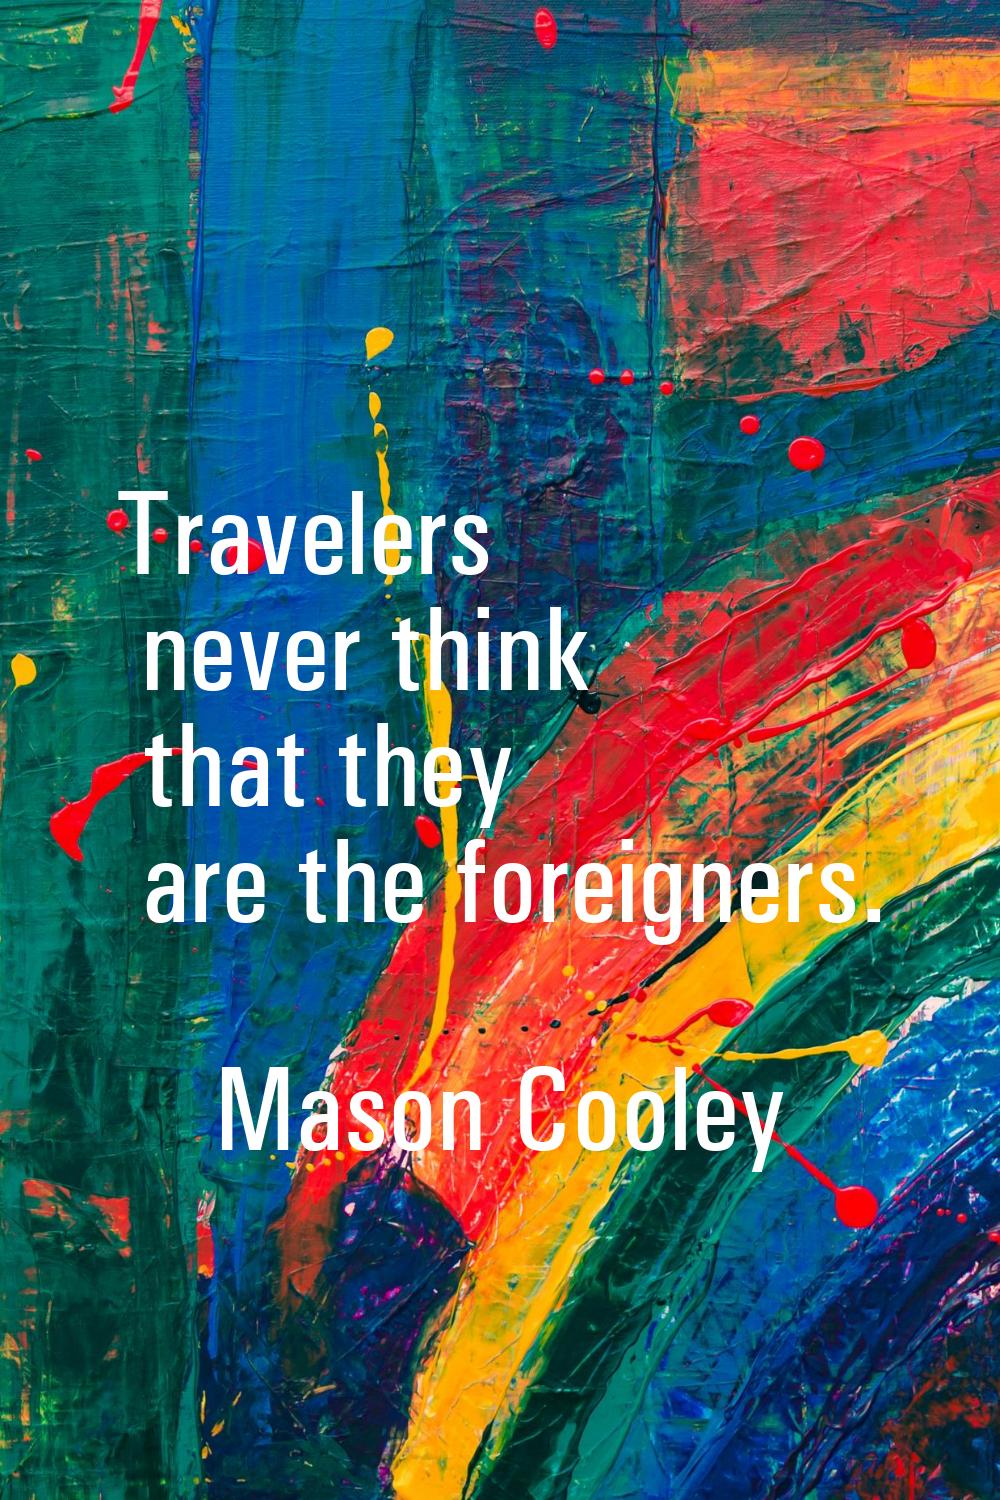 Travelers never think that they are the foreigners.